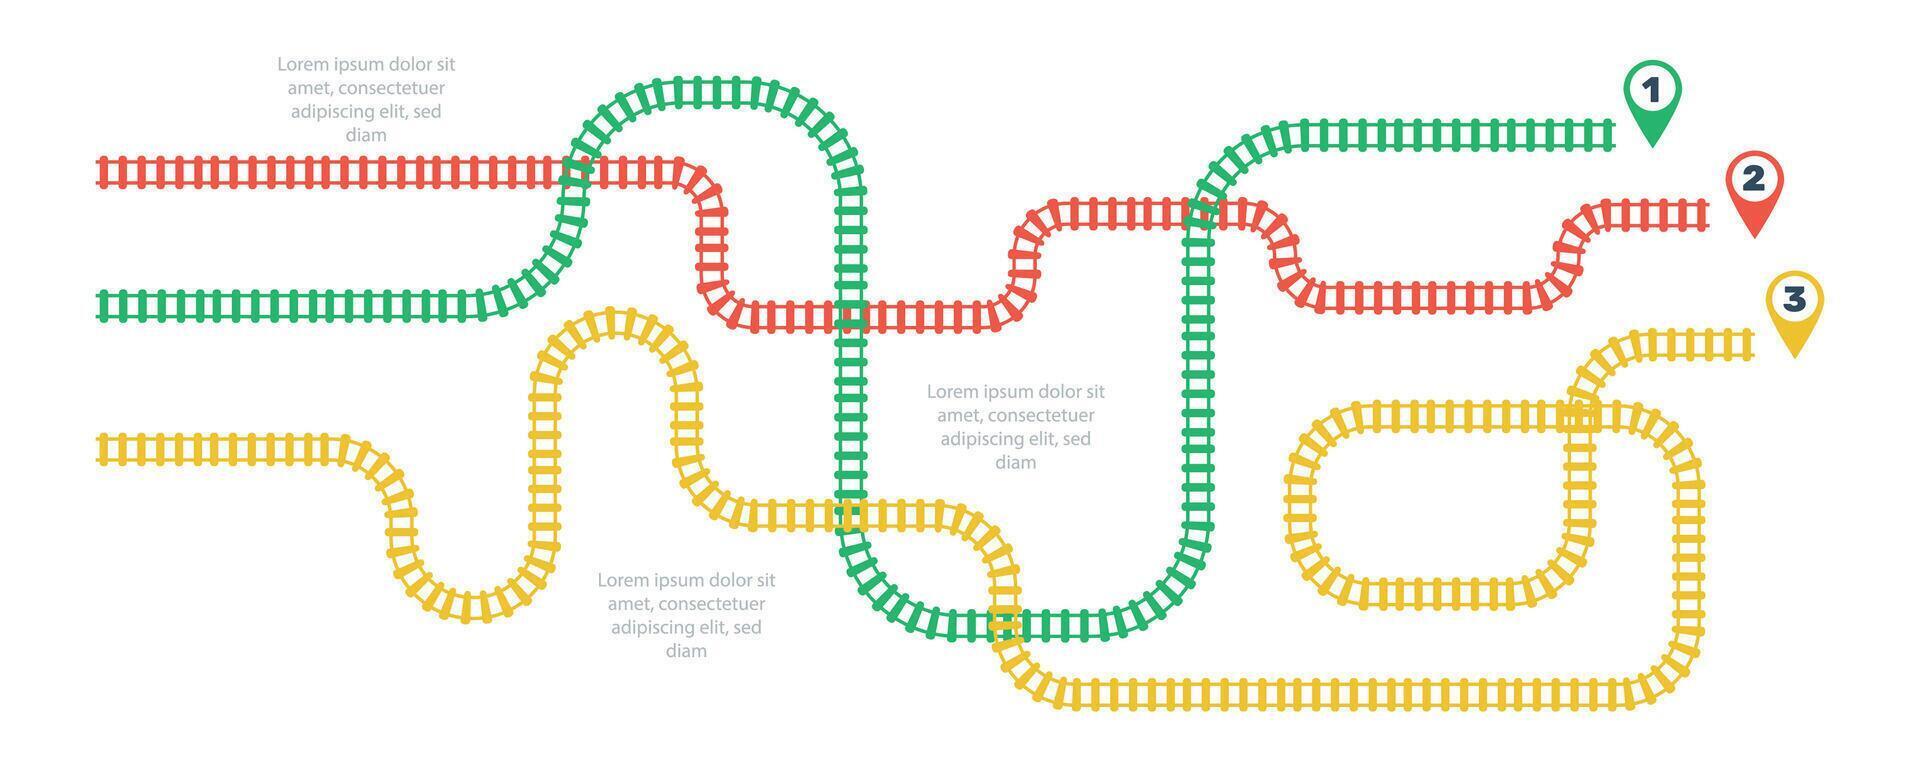 Railroad tracks, railway simple icon, rail track direction, train tracks colorful vector illustrations. Infographic elements, simple illustration on a white background.